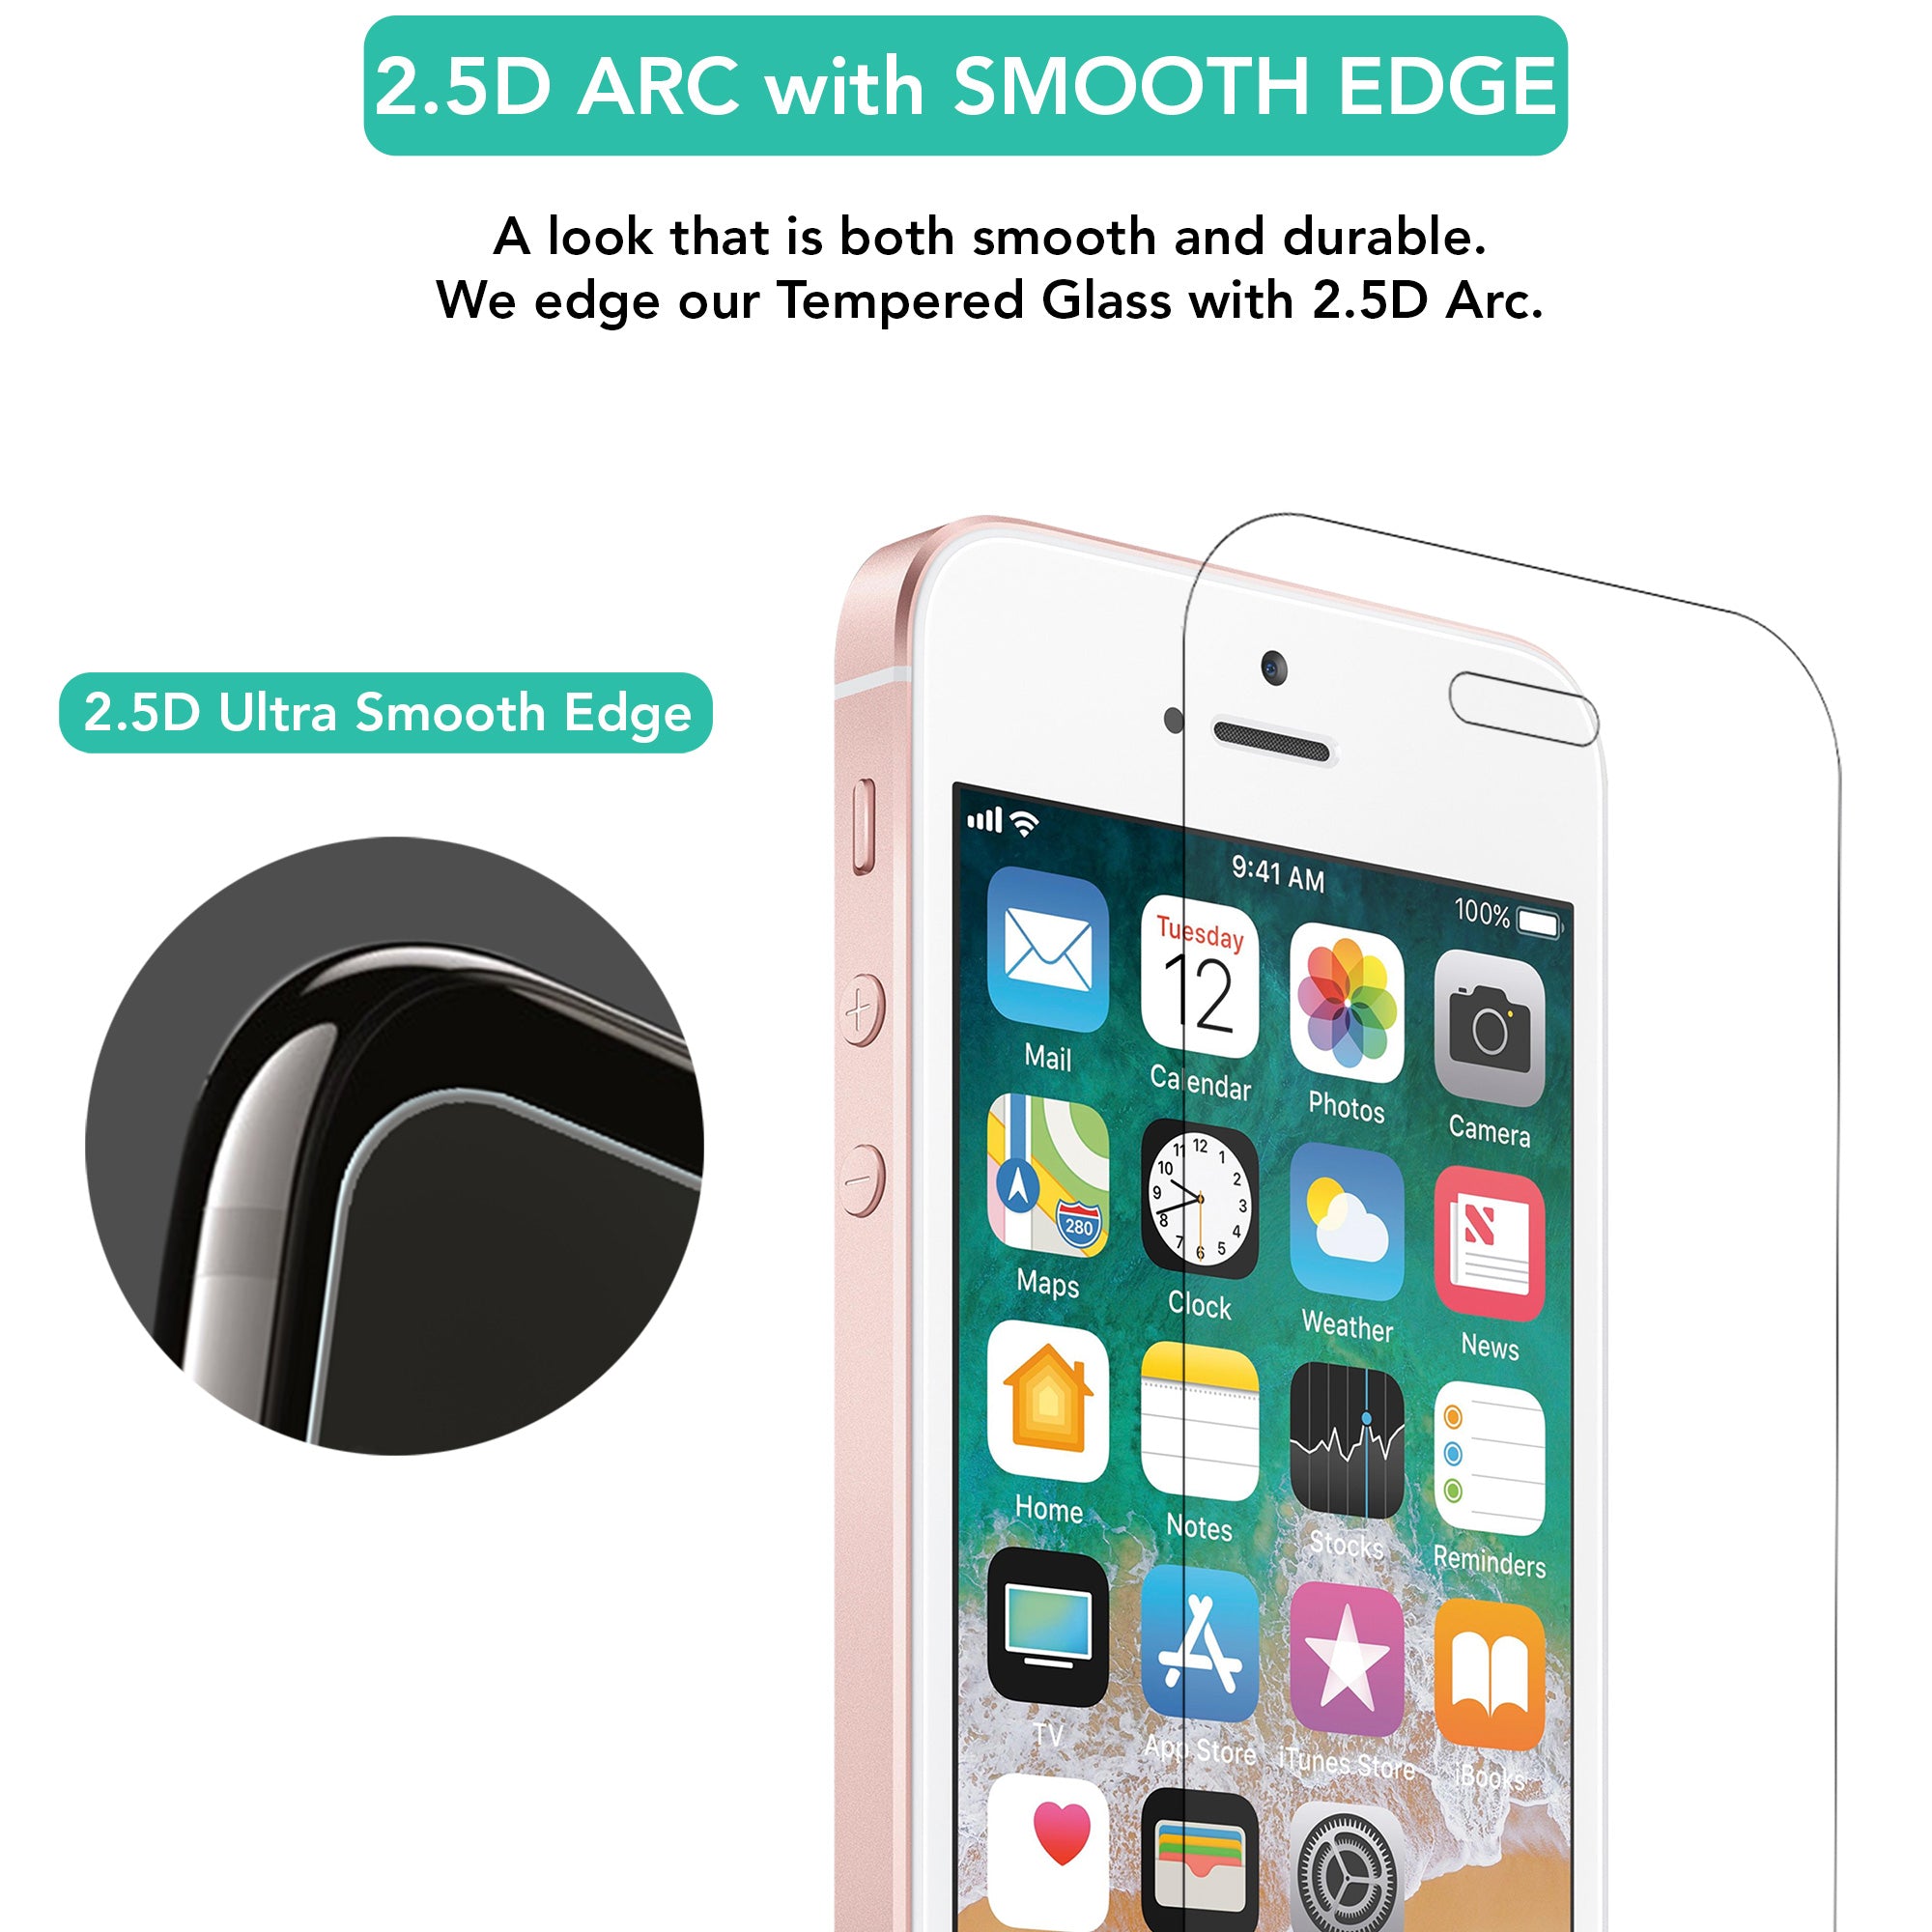 iPhone 5 / 5S / 5C / SE 1st Gen Tempered Glass Screen Protector